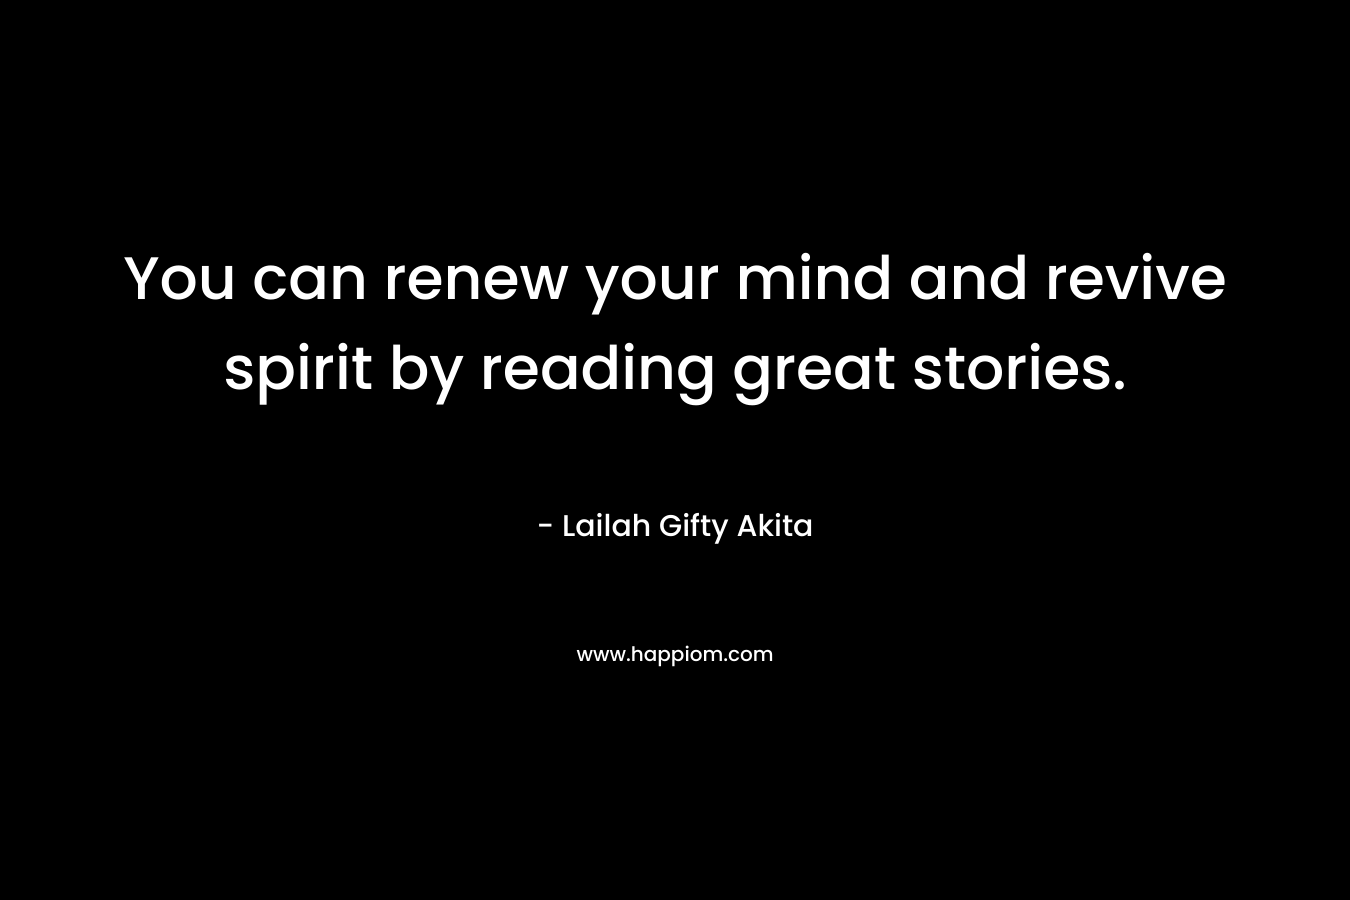 You can renew your mind and revive spirit by reading great stories. – Lailah Gifty Akita